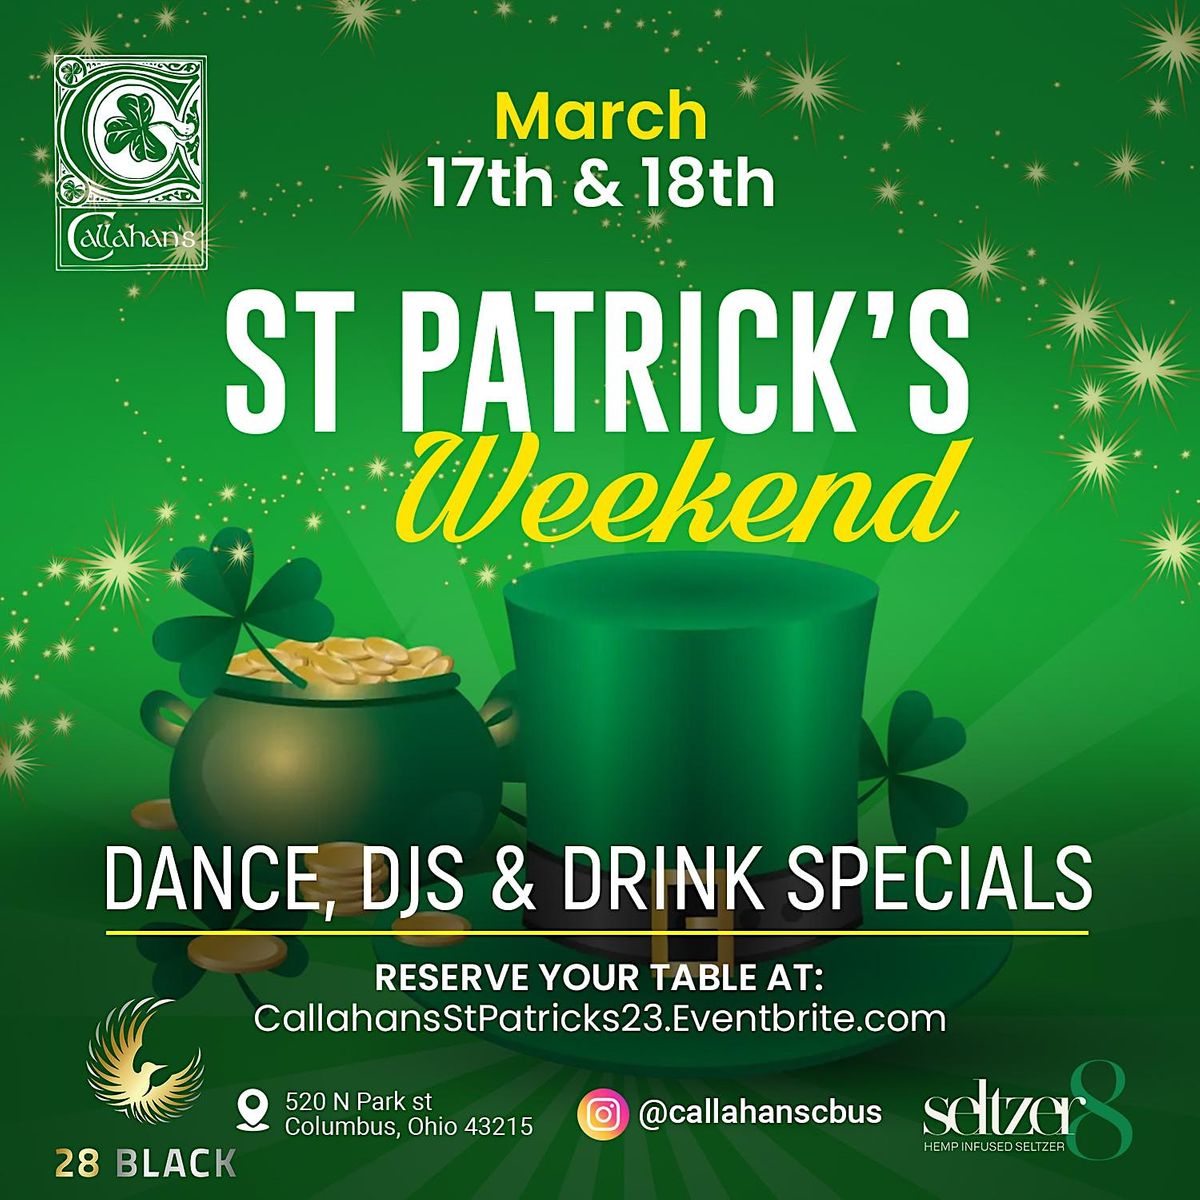 St. Patricks Day Weekend Parties Callahan's Columbus March 17 to